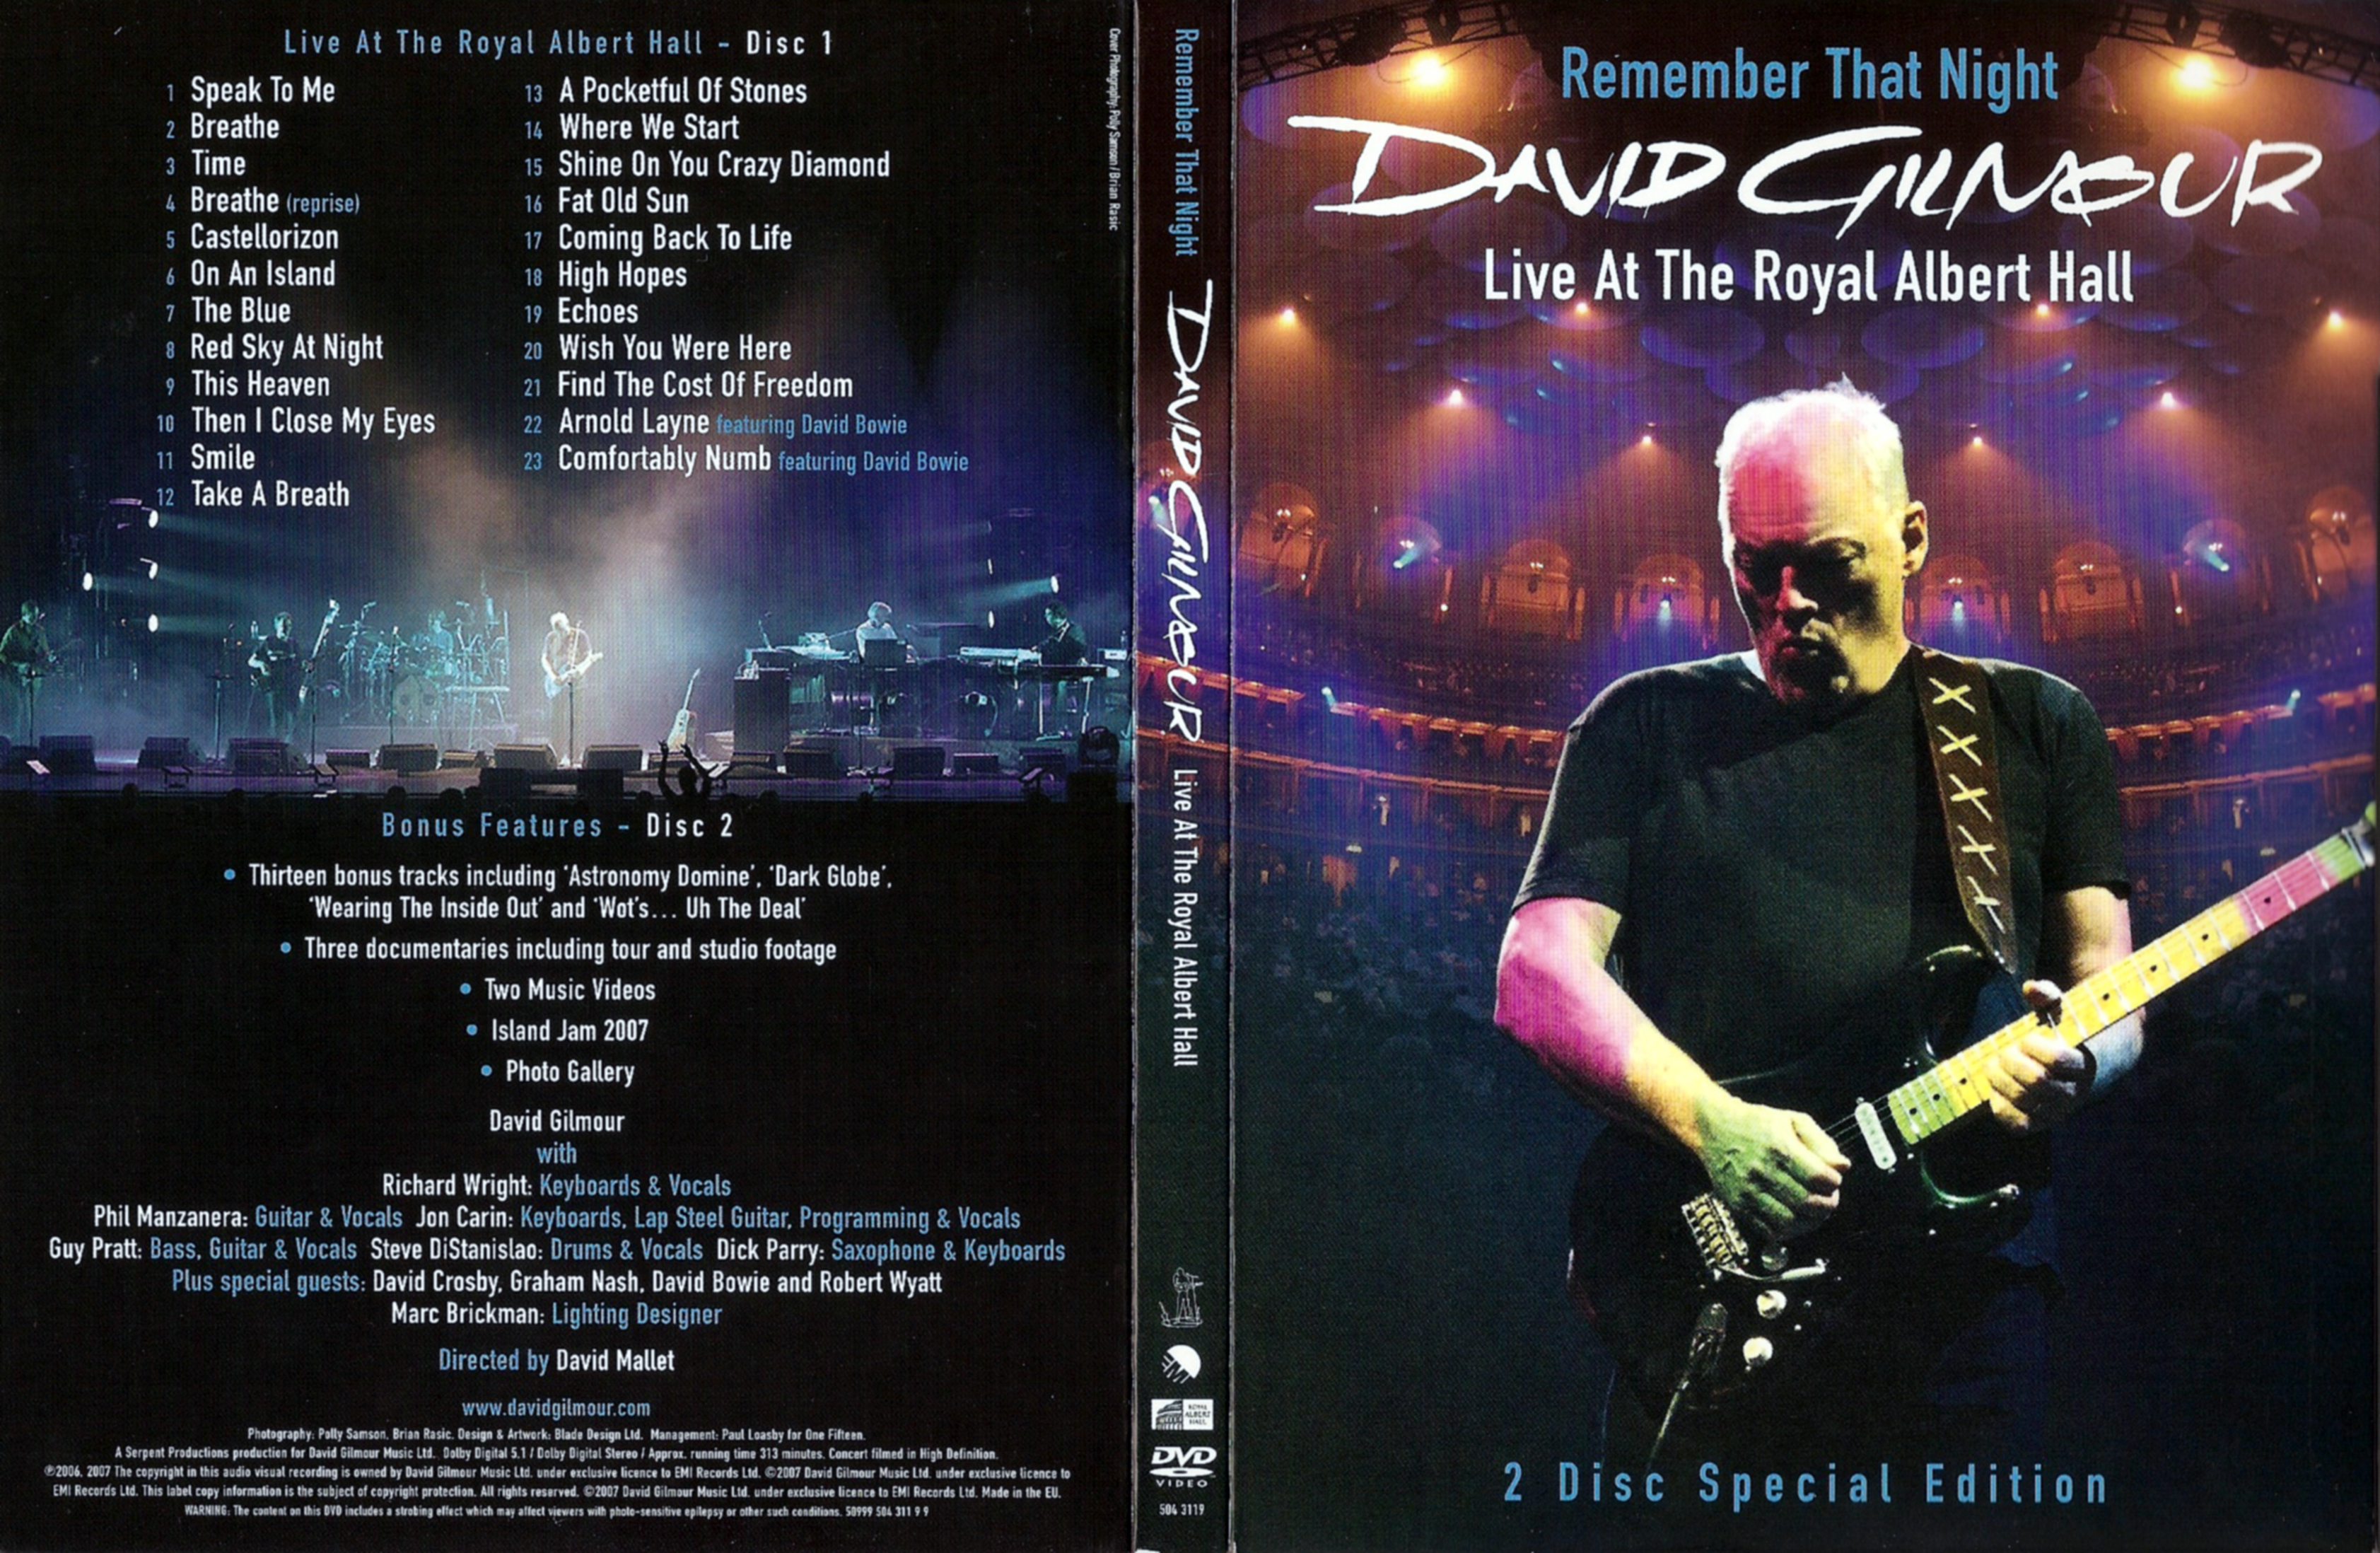 Jaquette DVD David Gilmour - Live at the Royal Albert Hall